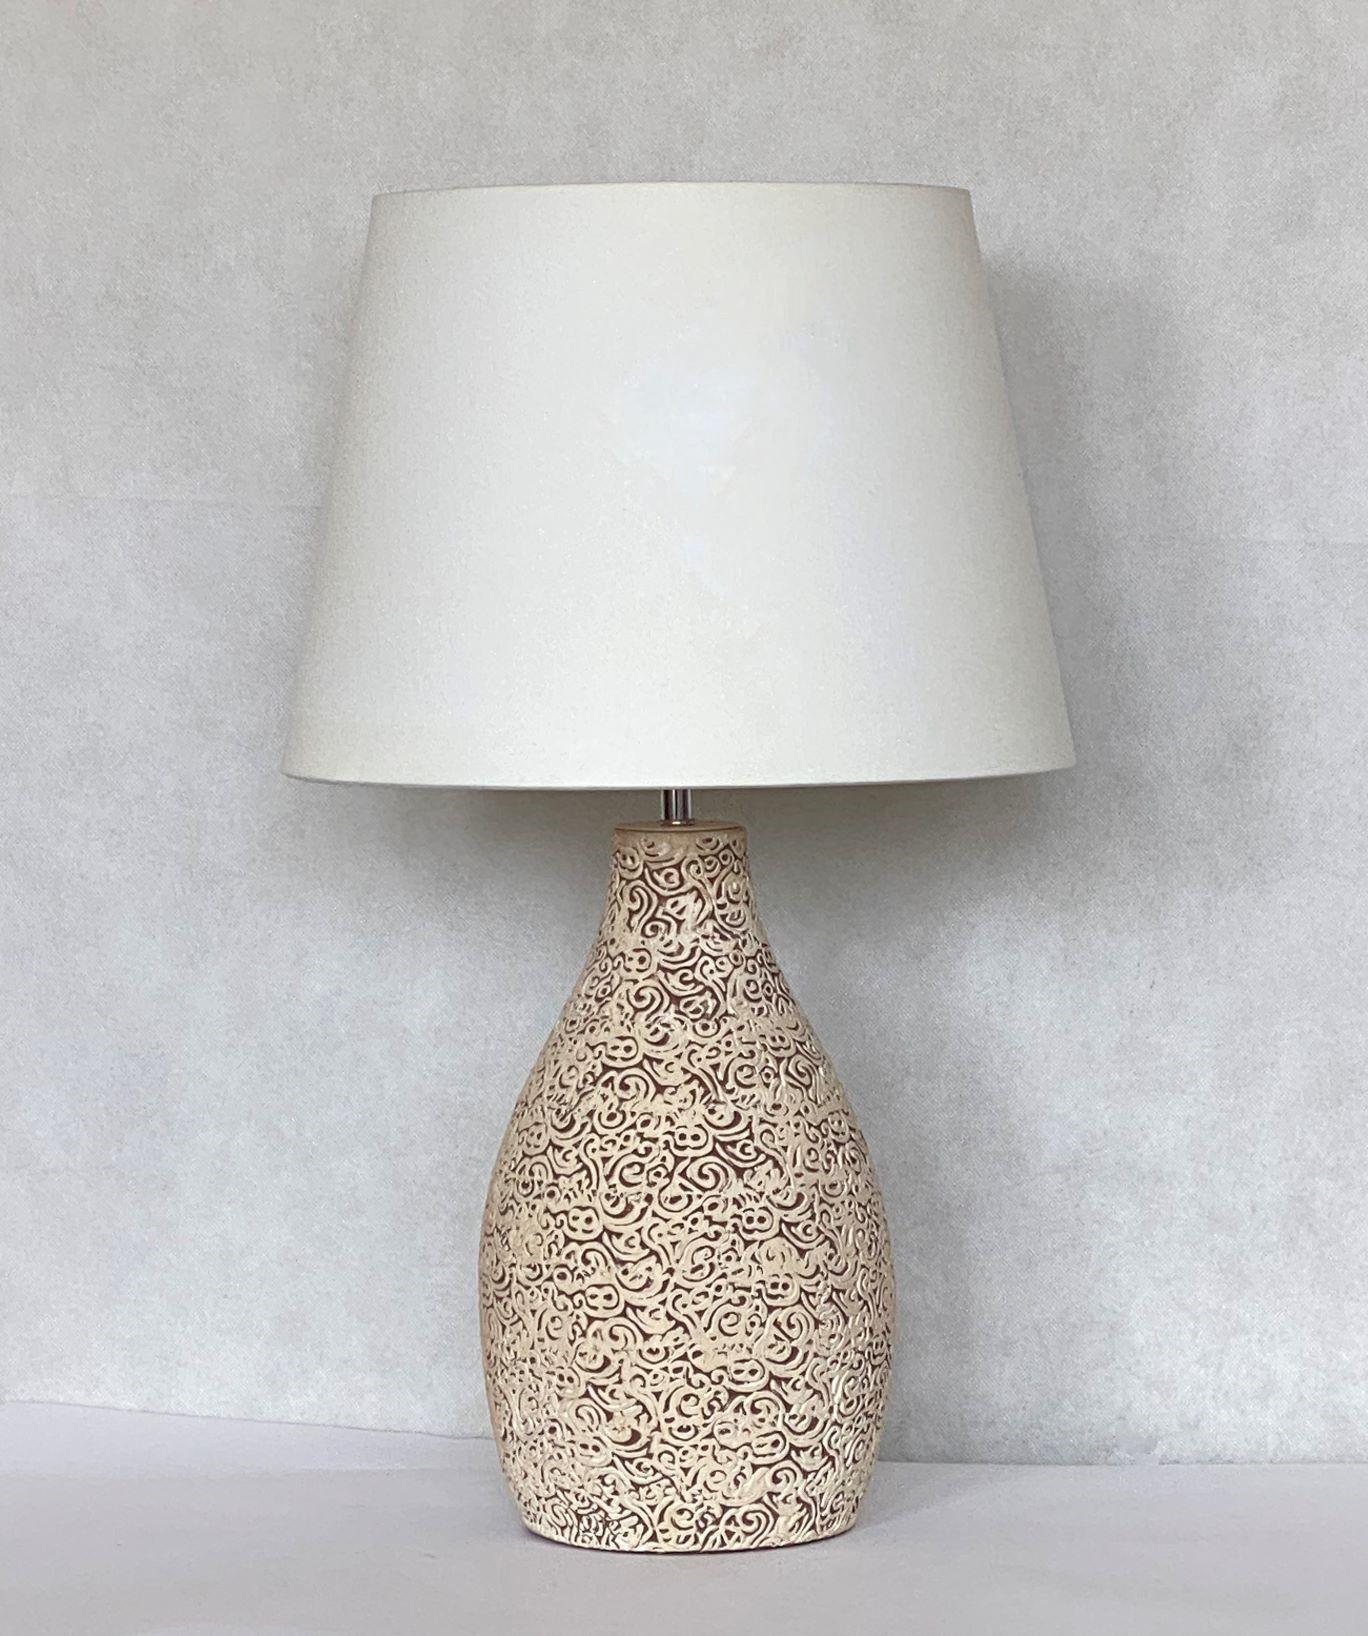 Mid-Century Modern Pair of French Hand-Crafted Ceramic Table Lamps, 1960s For Sale